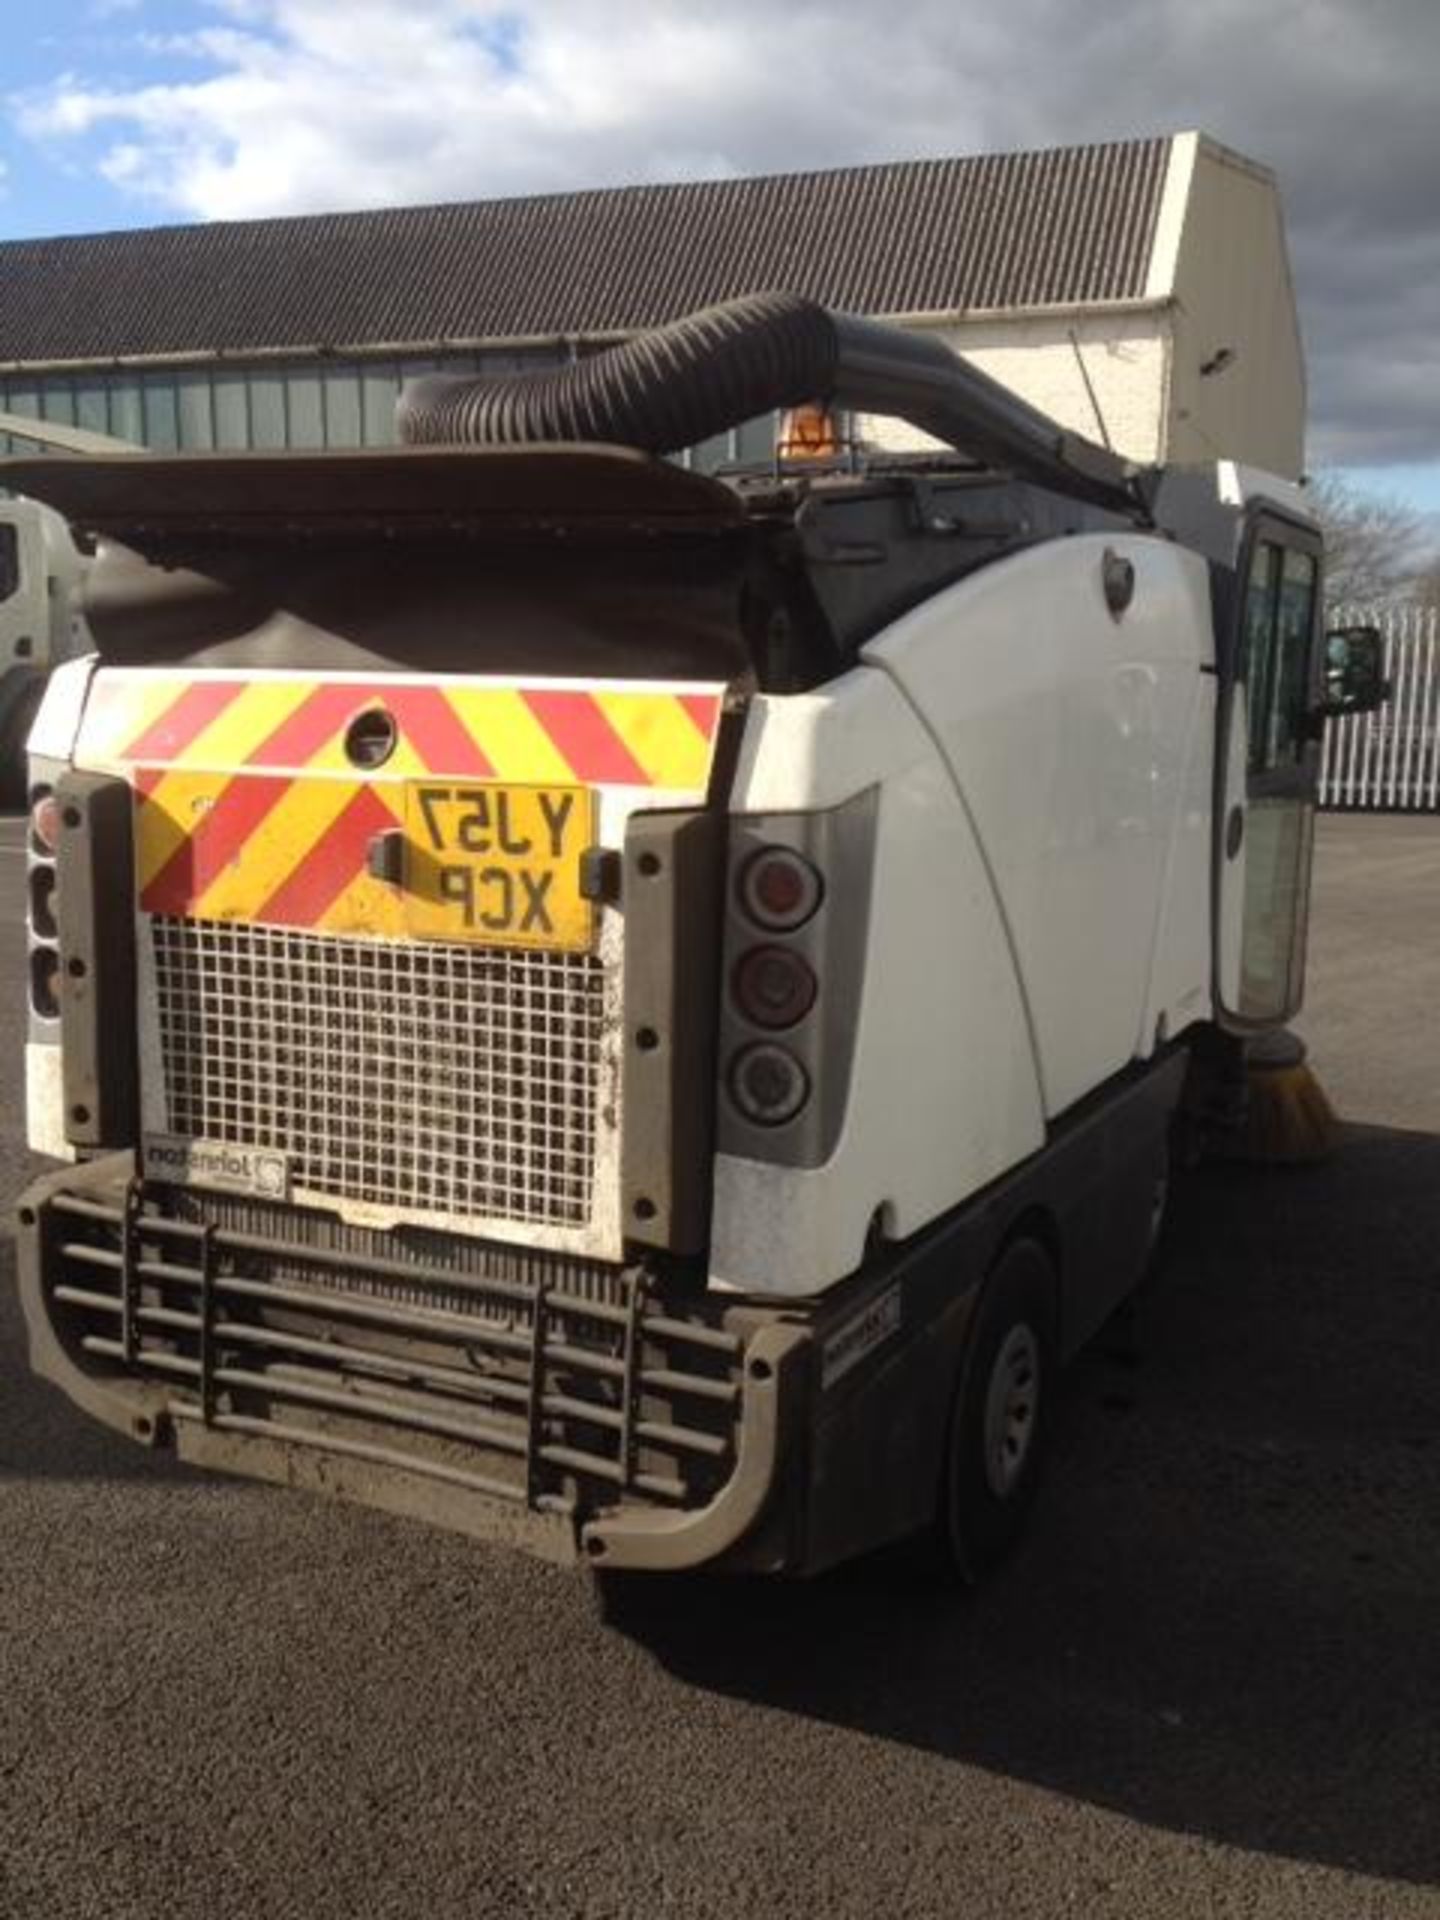 JOHNSTON COMPACT ROAD SWEEPER - Model: CX200 - Date in Service: Nov 2007 - Reg: YJ57 XCP - Hours: 82 - Image 2 of 2